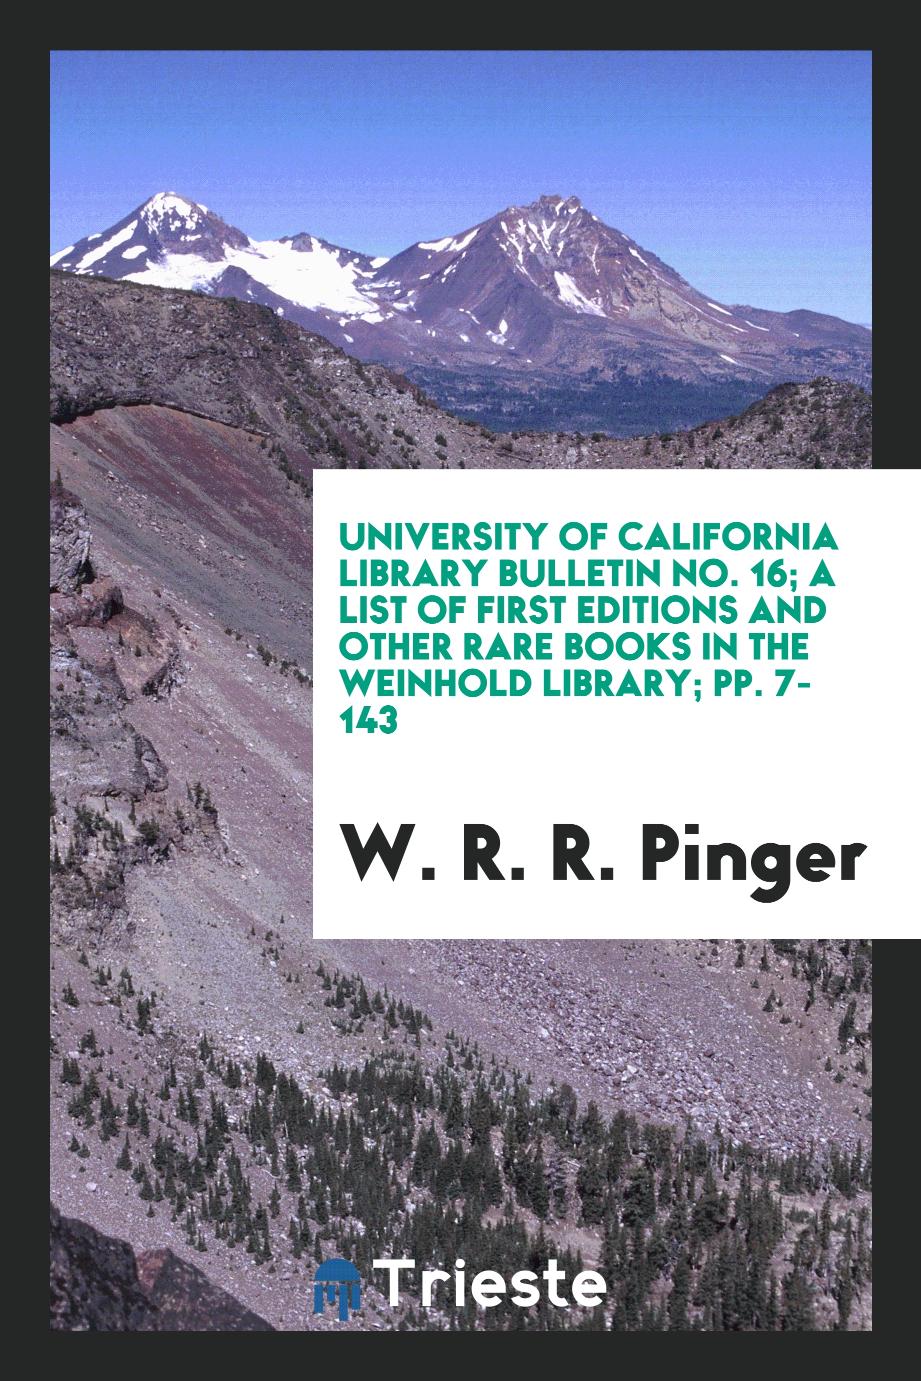 University of California Library Bulletin No. 16; A List of First Editions and Other Rare Books in the Weinhold Library; pp. 7-143